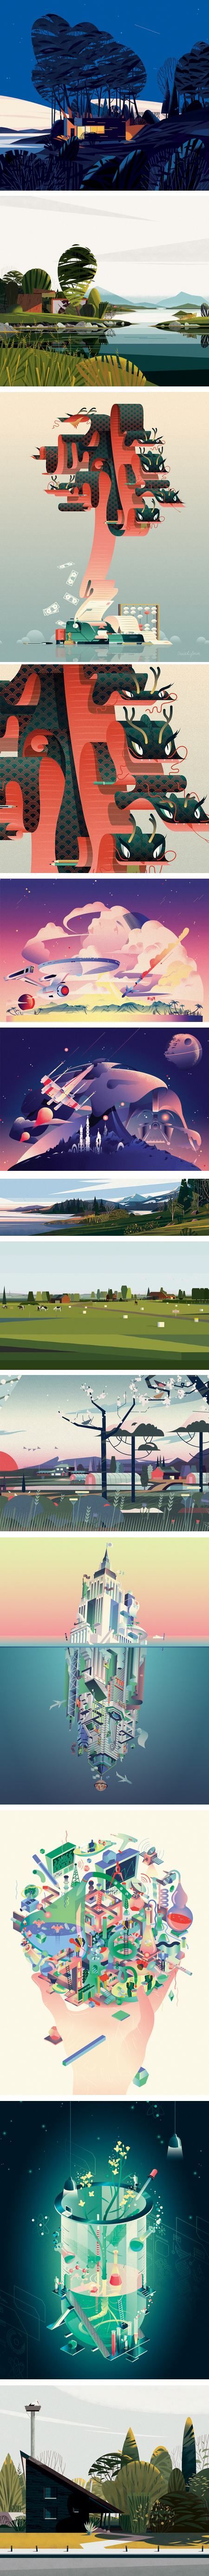 Marie-Laure Cruschi (Cruschiform), Cabins and other vector illustrations